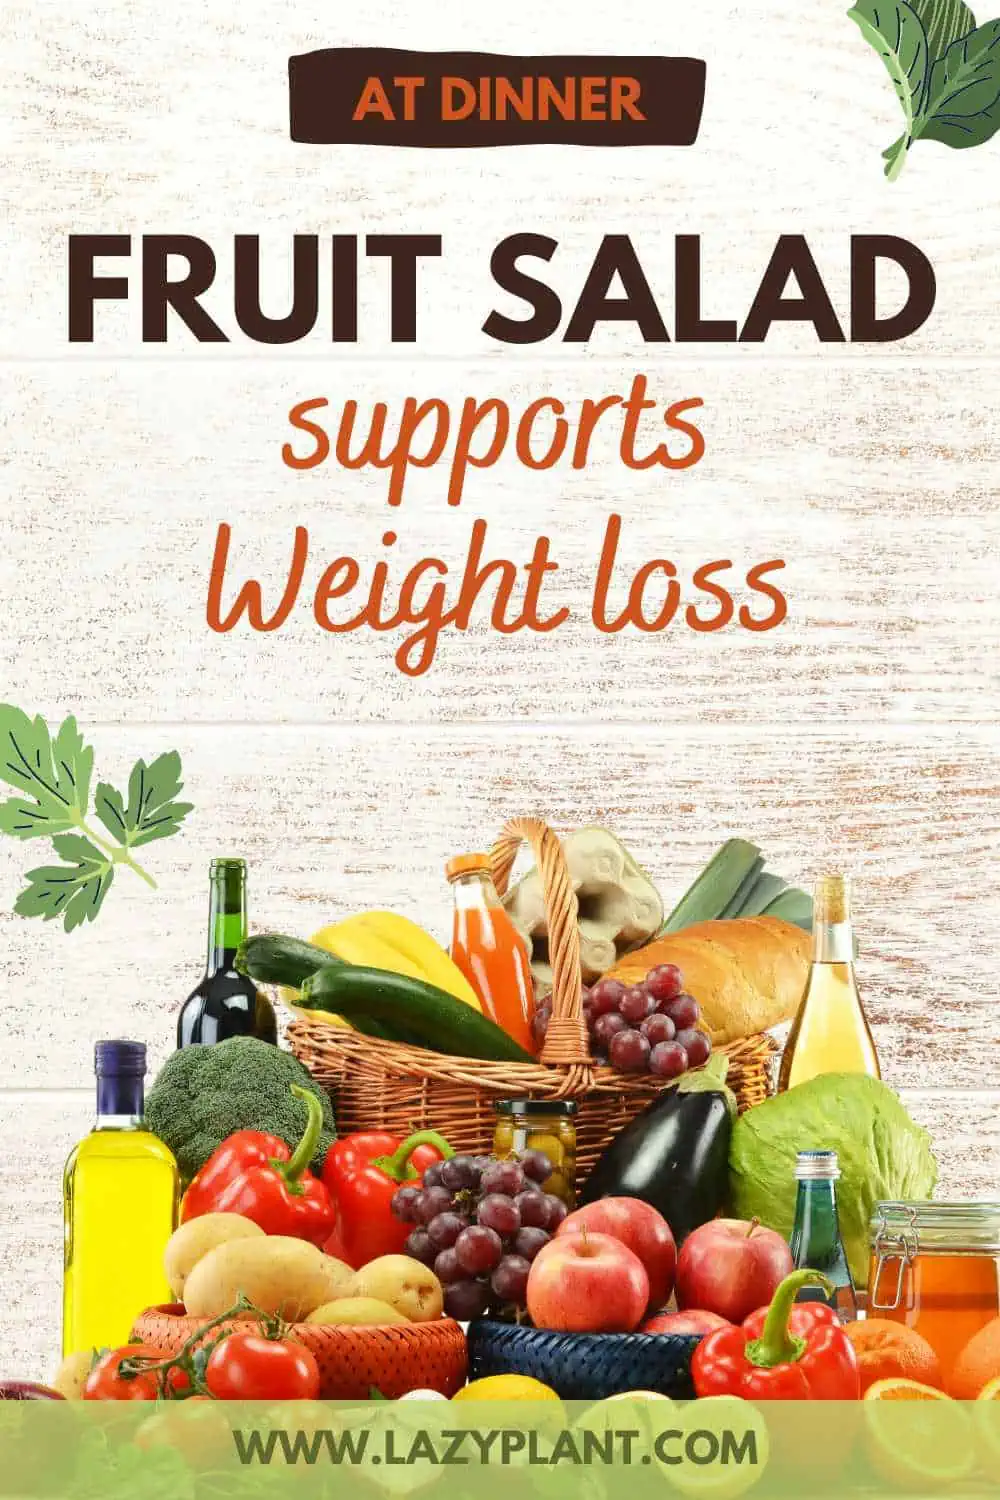 How to eat a fruit salad for weight loss?